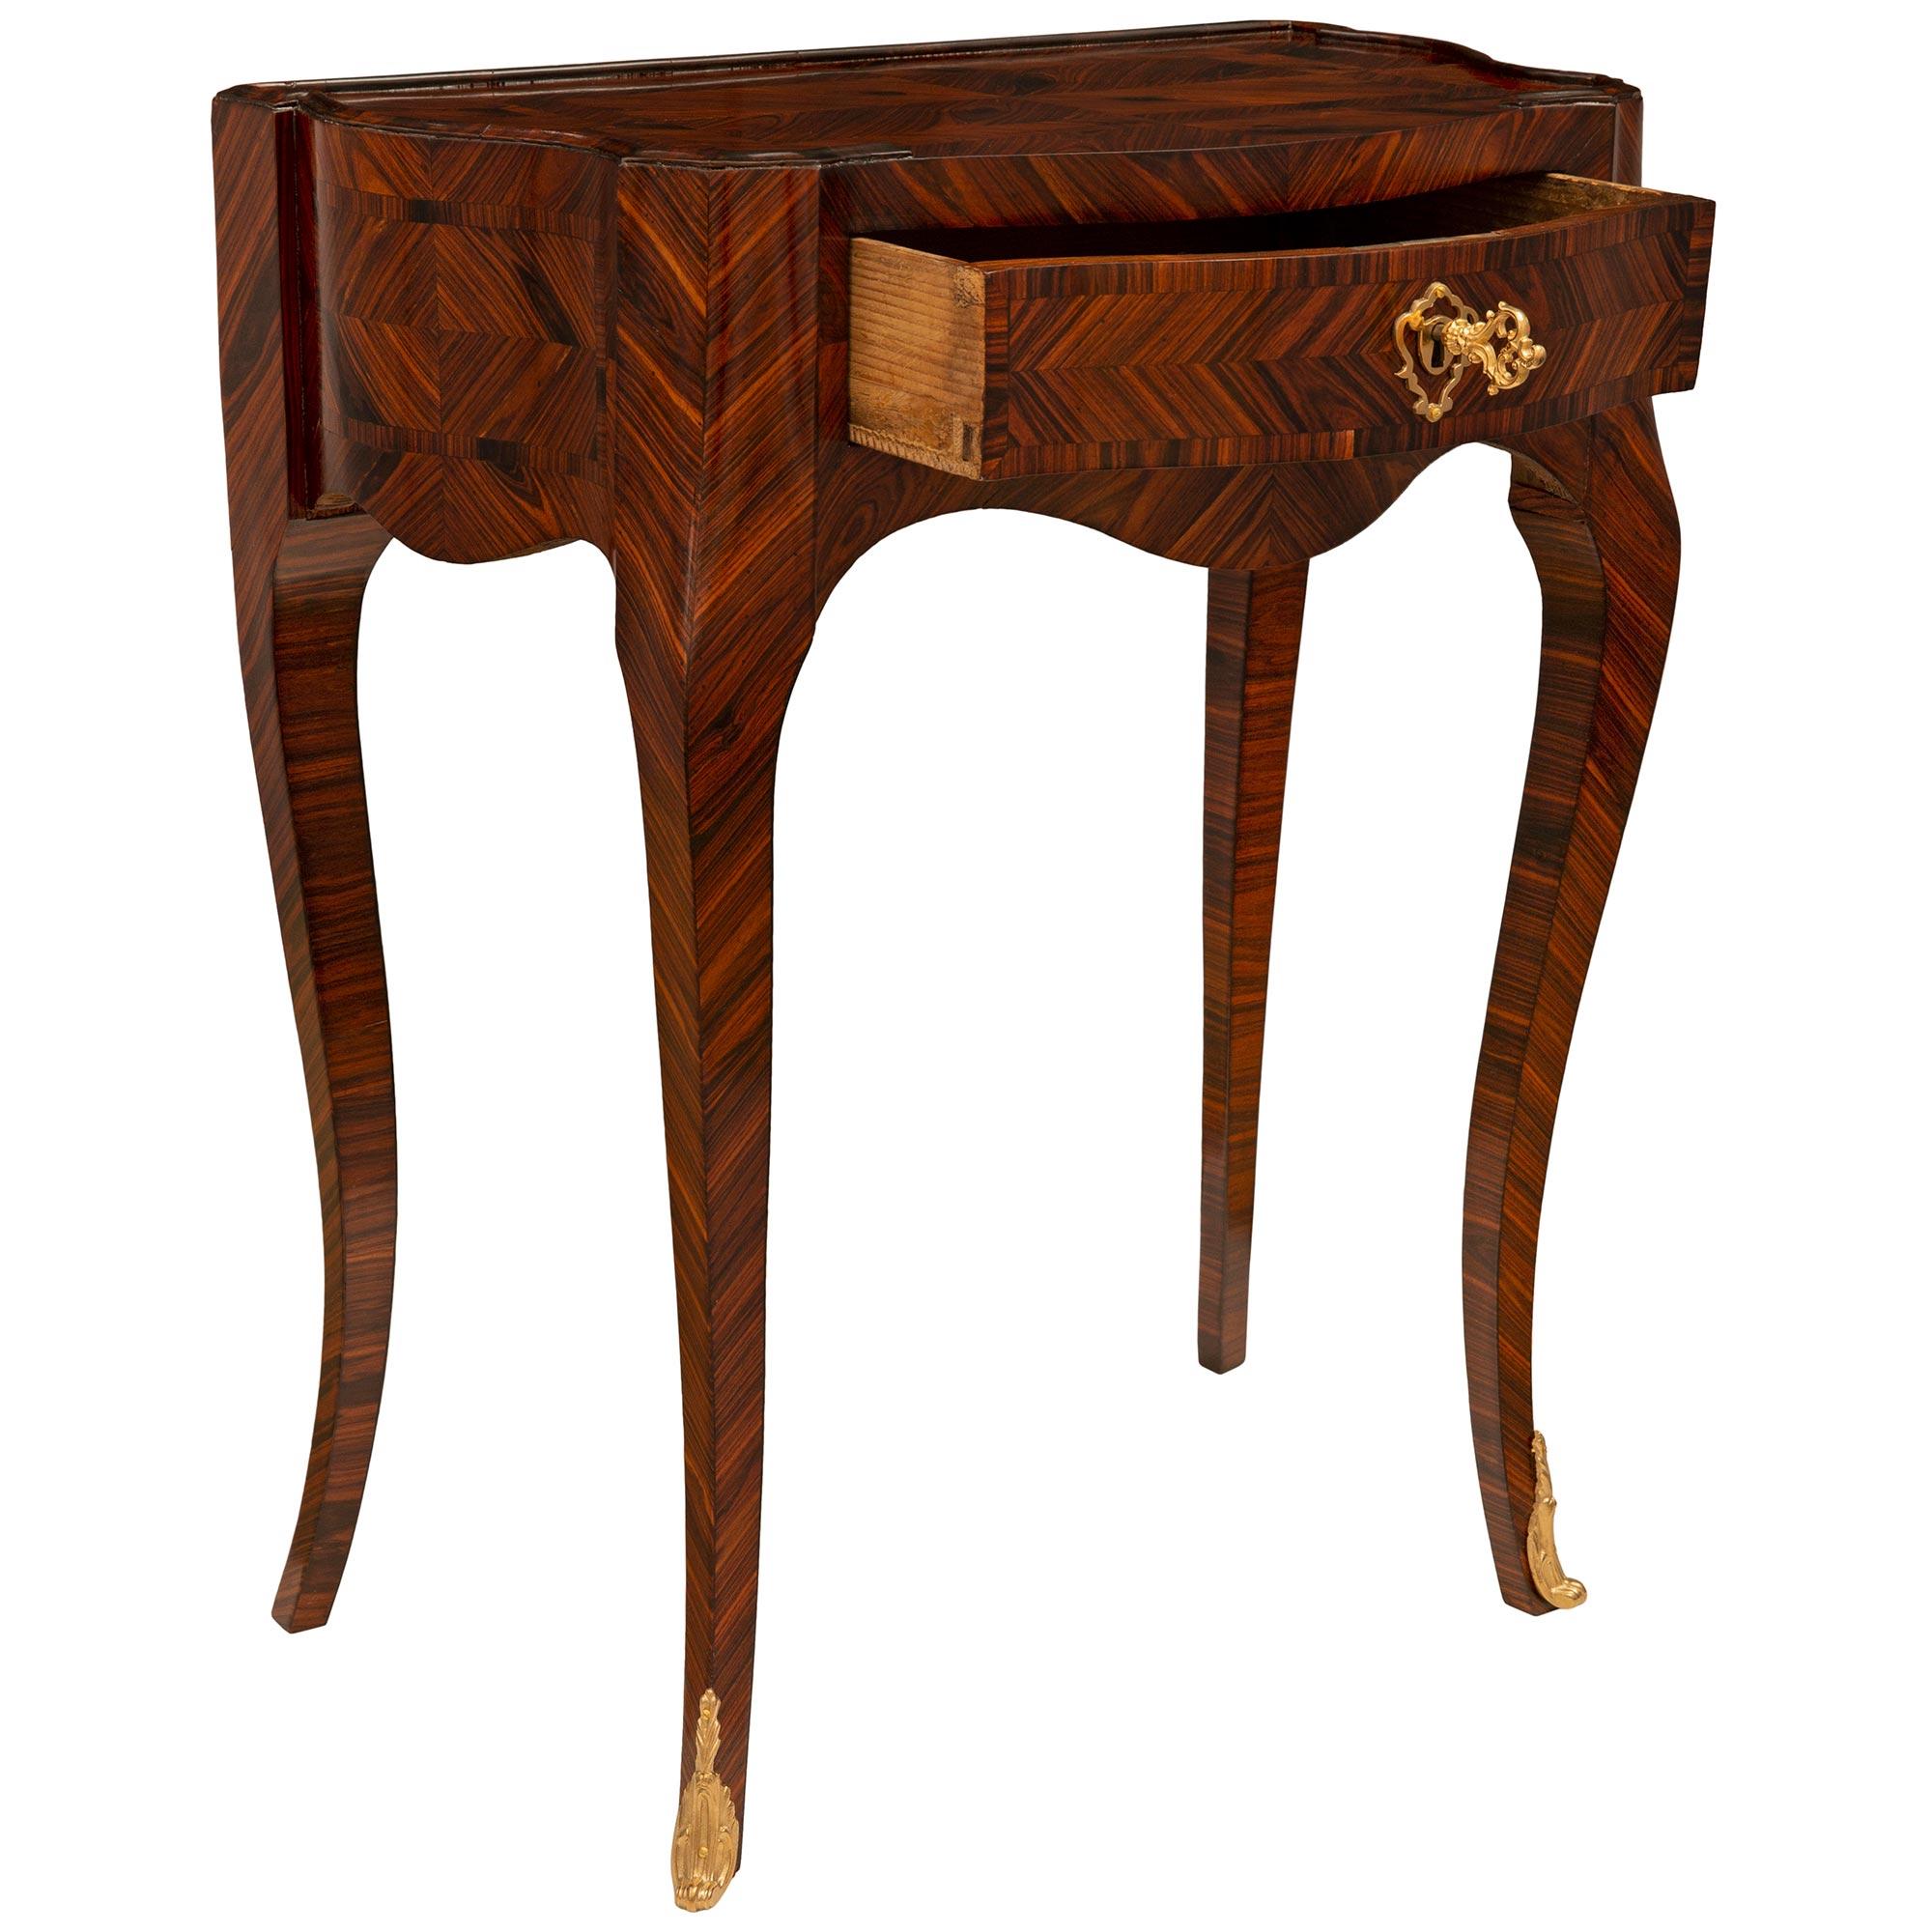 Pair Of Italian 19th Century Genovese St. Rosewood And Ormolu Side Tables In Good Condition For Sale In West Palm Beach, FL